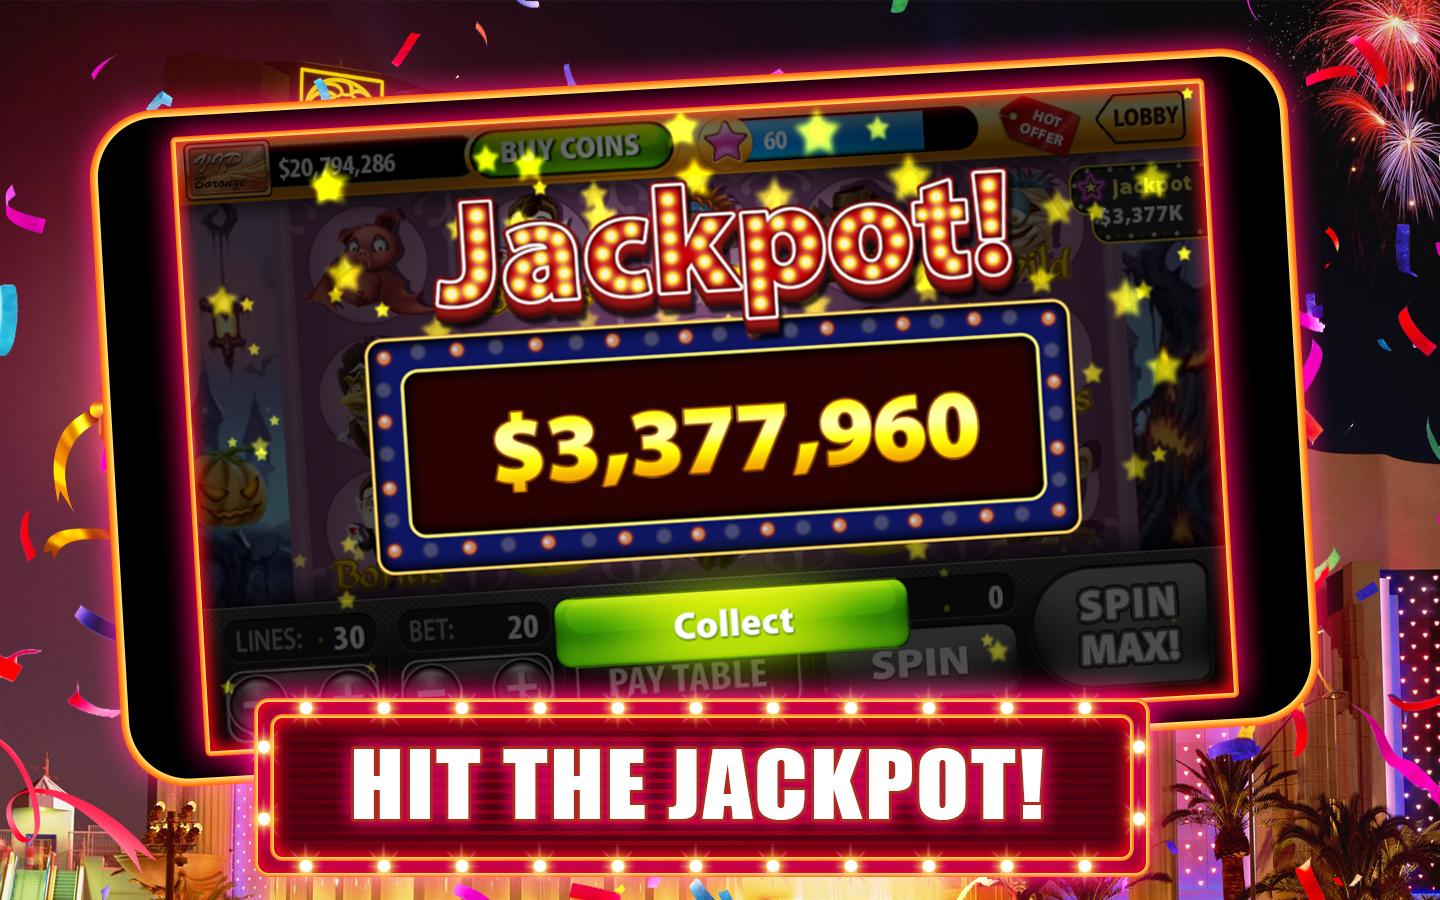 How To Win Big At Slot Machines